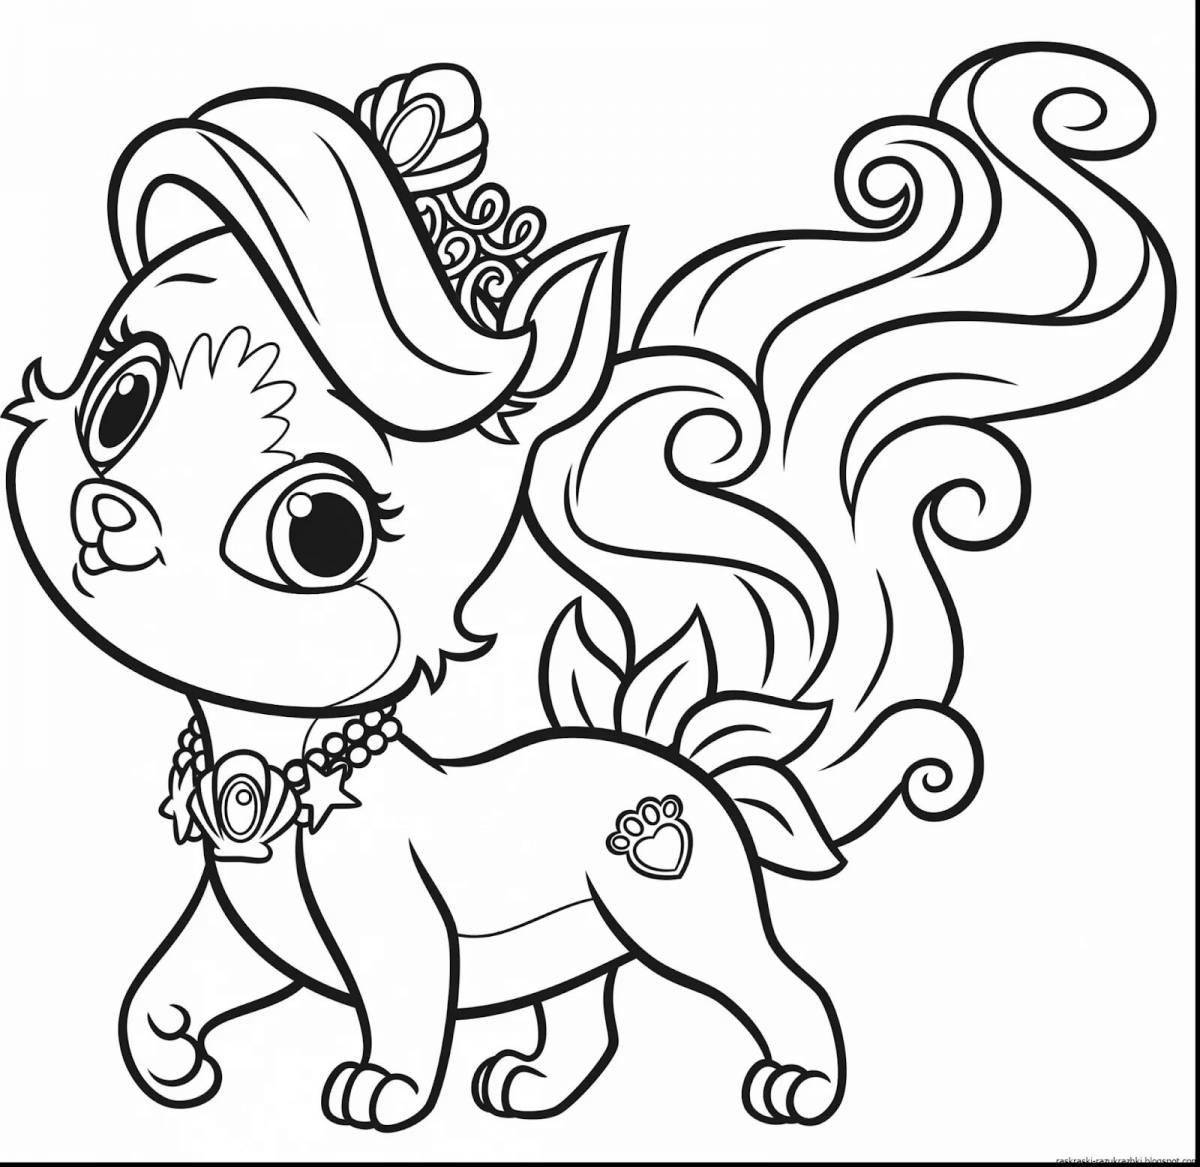 Fun coloring book kittens dogs for children 3 4 years old